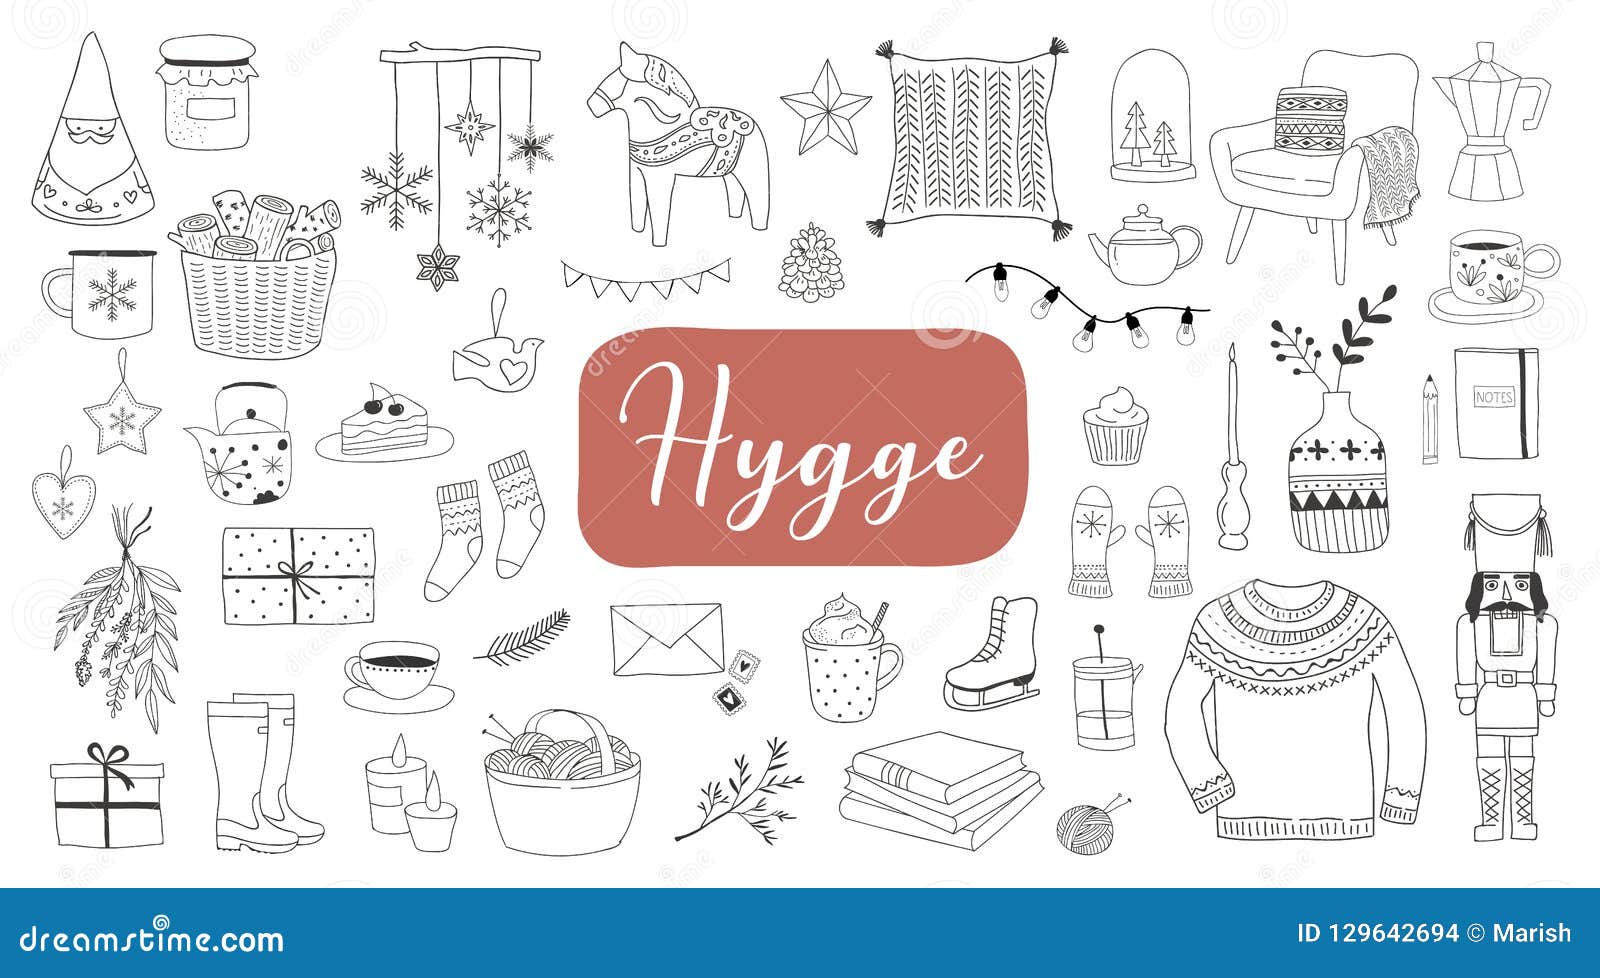 nordic, scandinavian winter s and hygge concept , merry christmas card, banner, background